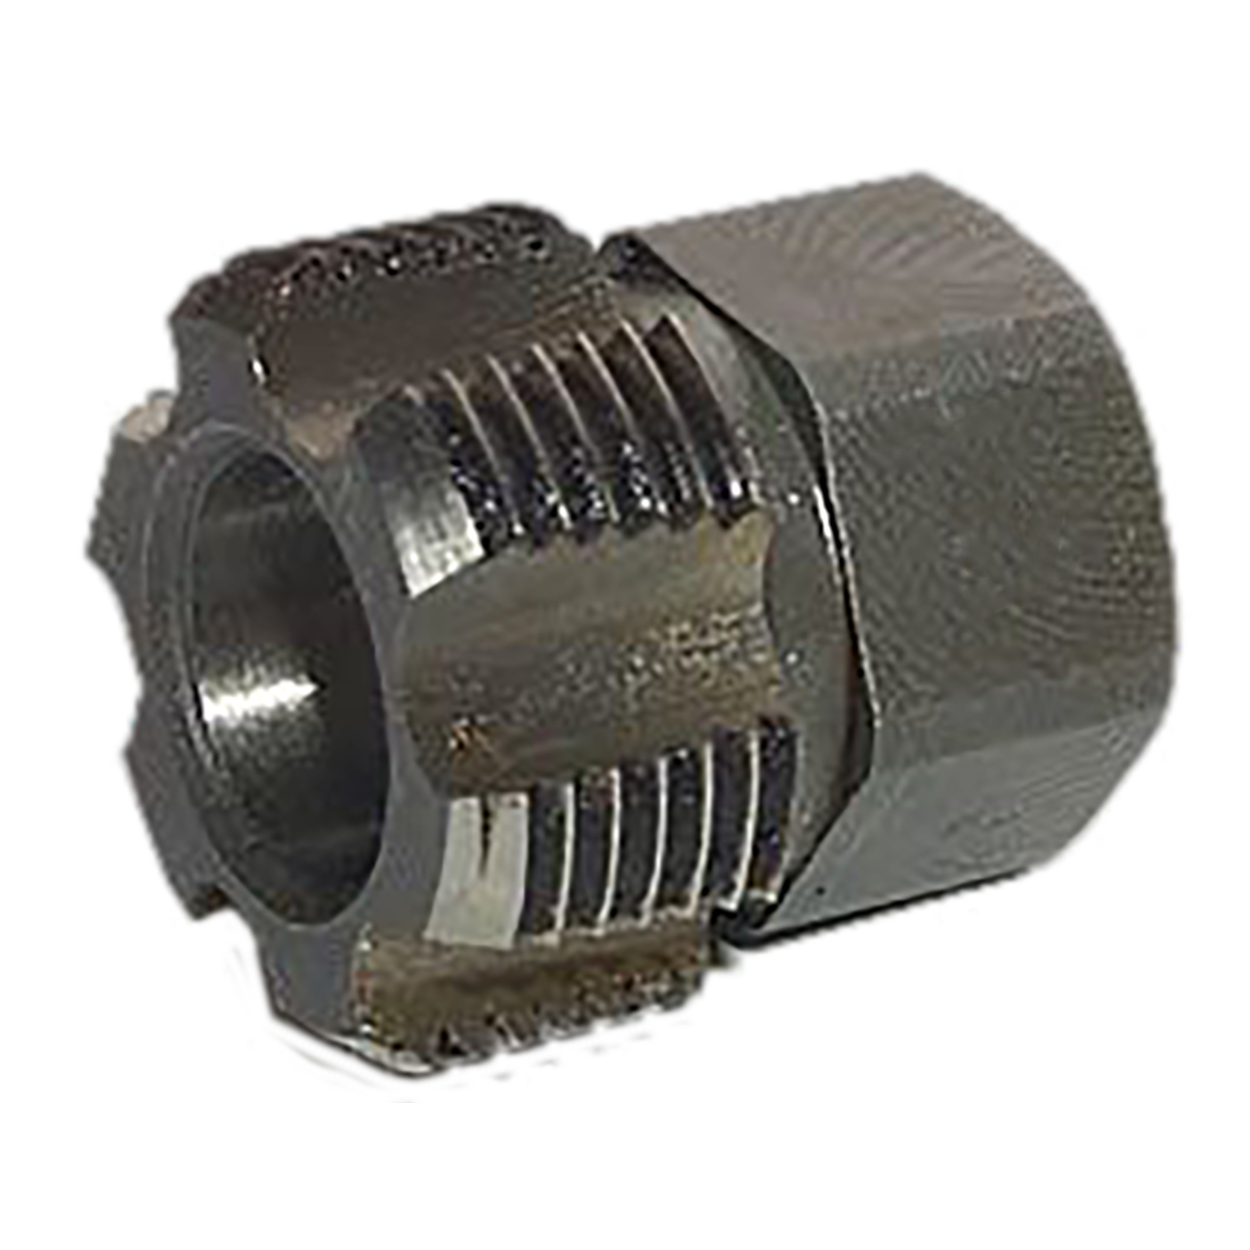 HSS hand tap M24x1.5mm for extractor thread in crank